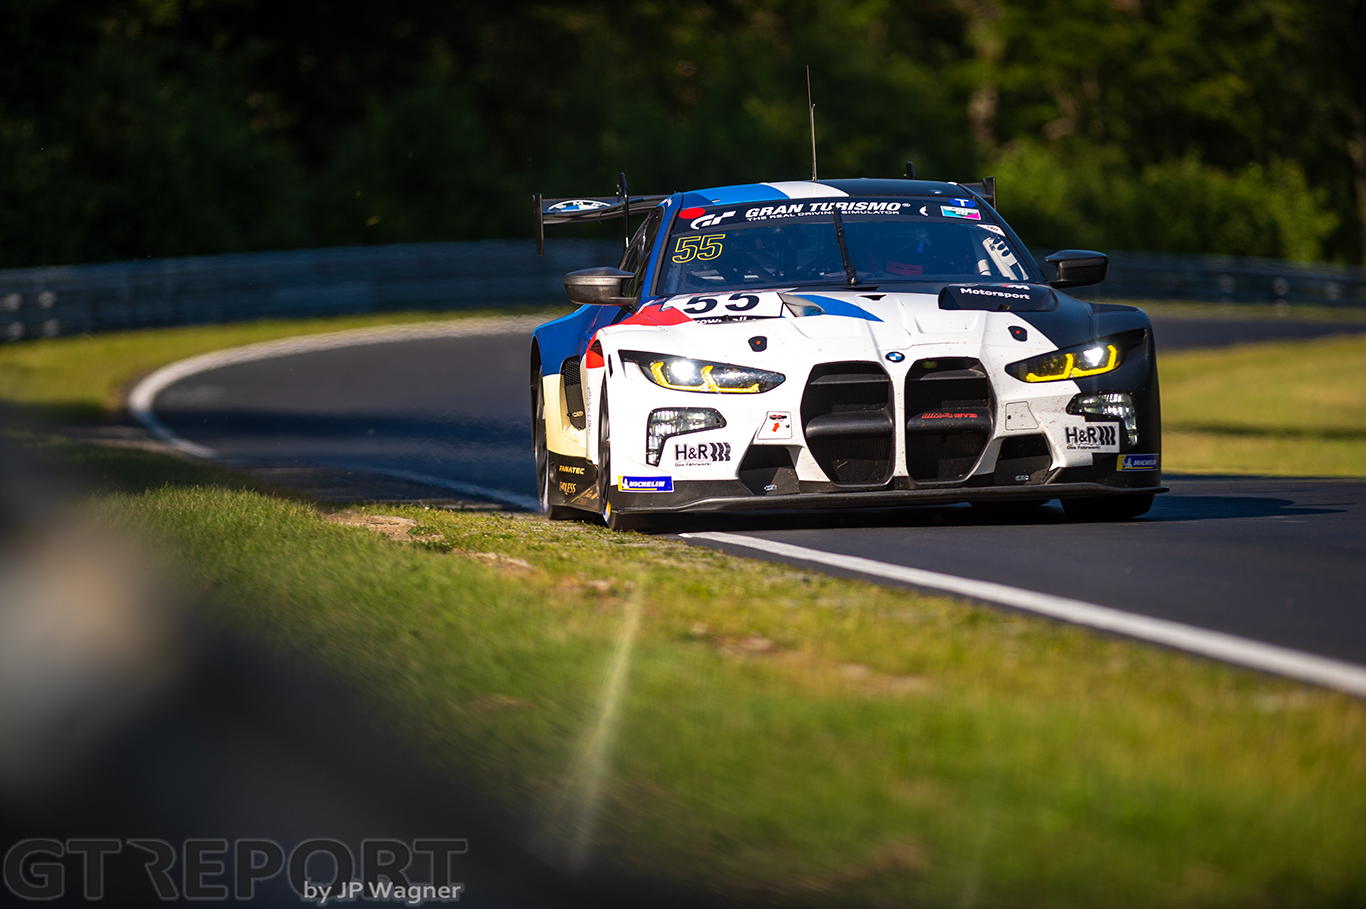 BMW M4 GT3 race debut postponed following practice accident